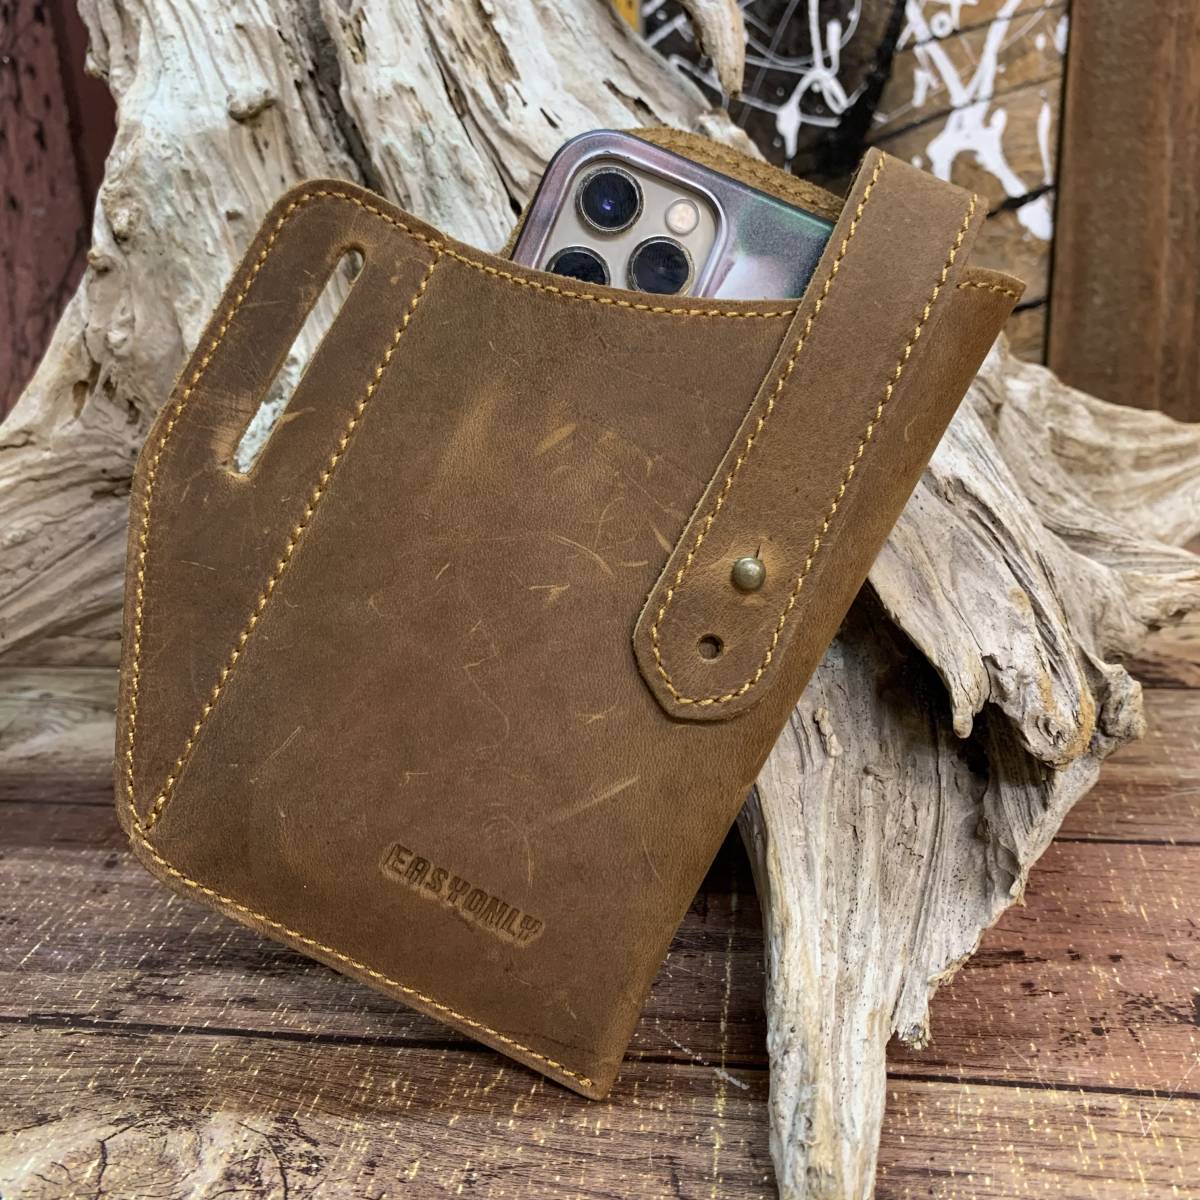  new goods original leather mobile holder case ho ru Star smartphone iPhone waist bag belt pouch telephone inserting case n back Brown free shipping 